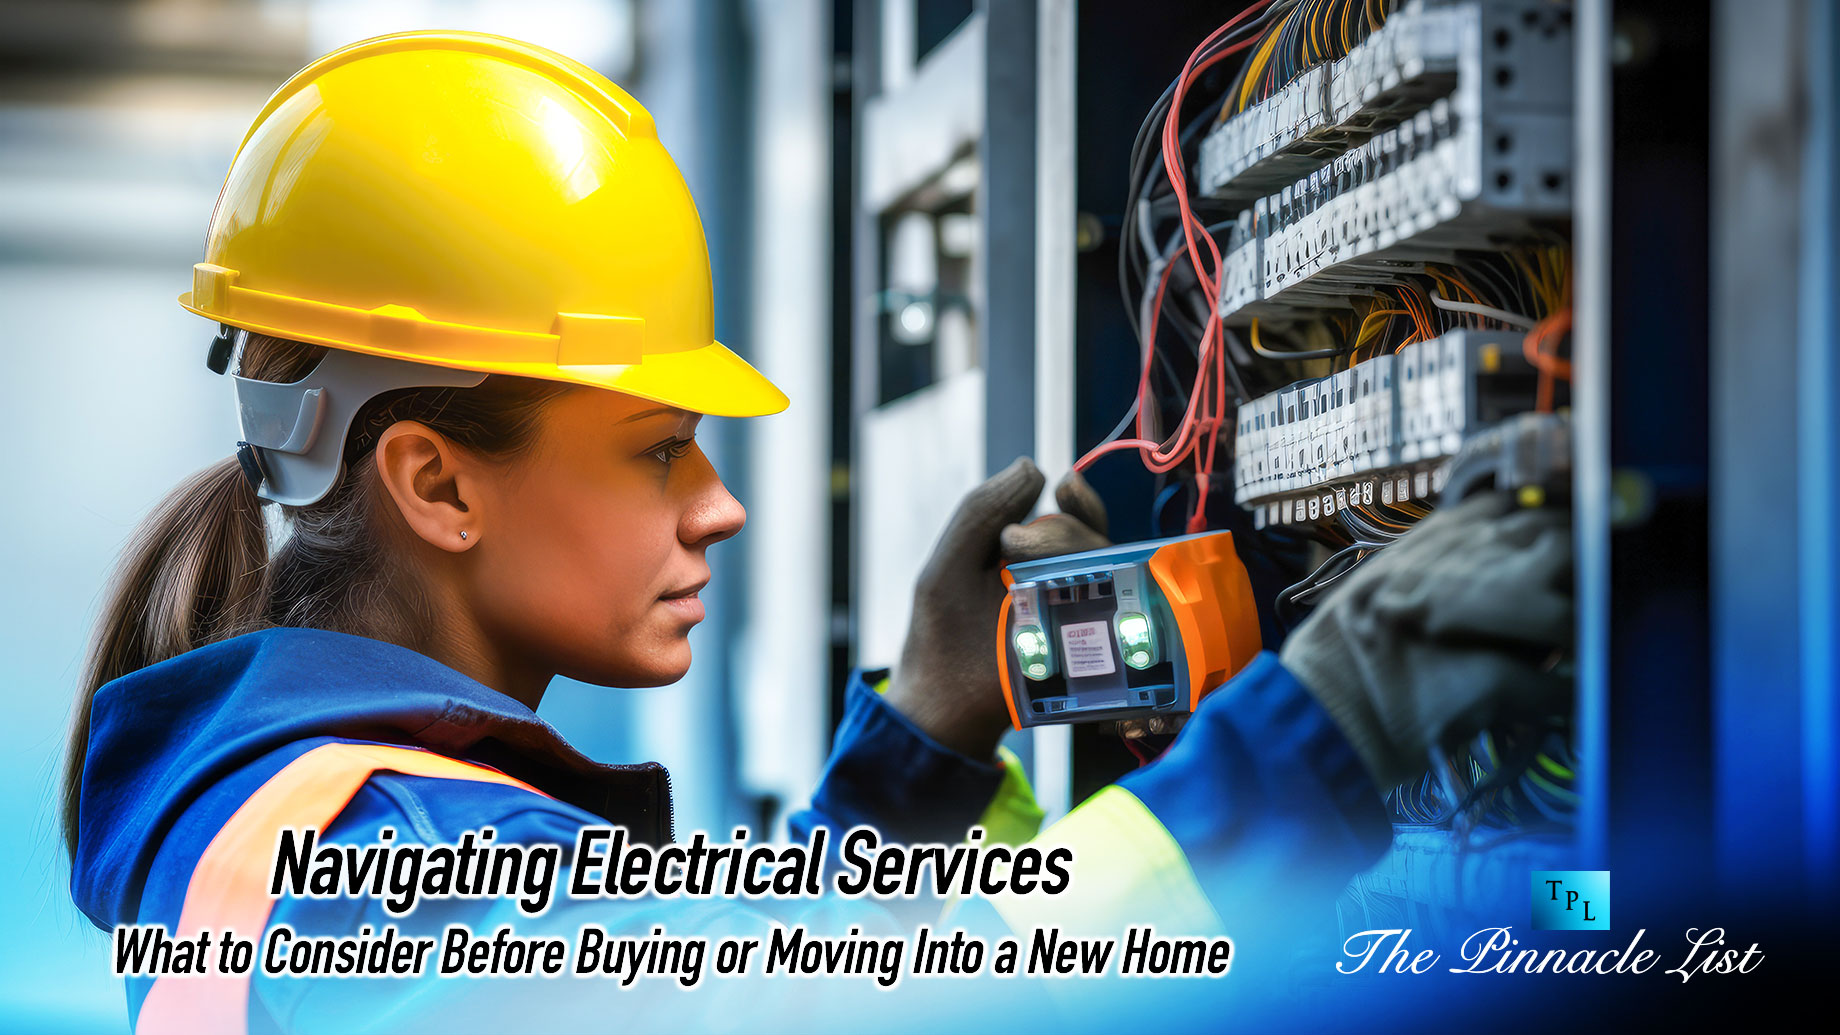 Navigating Electrical Services: What to Consider Before Buying or Moving Into a New Home